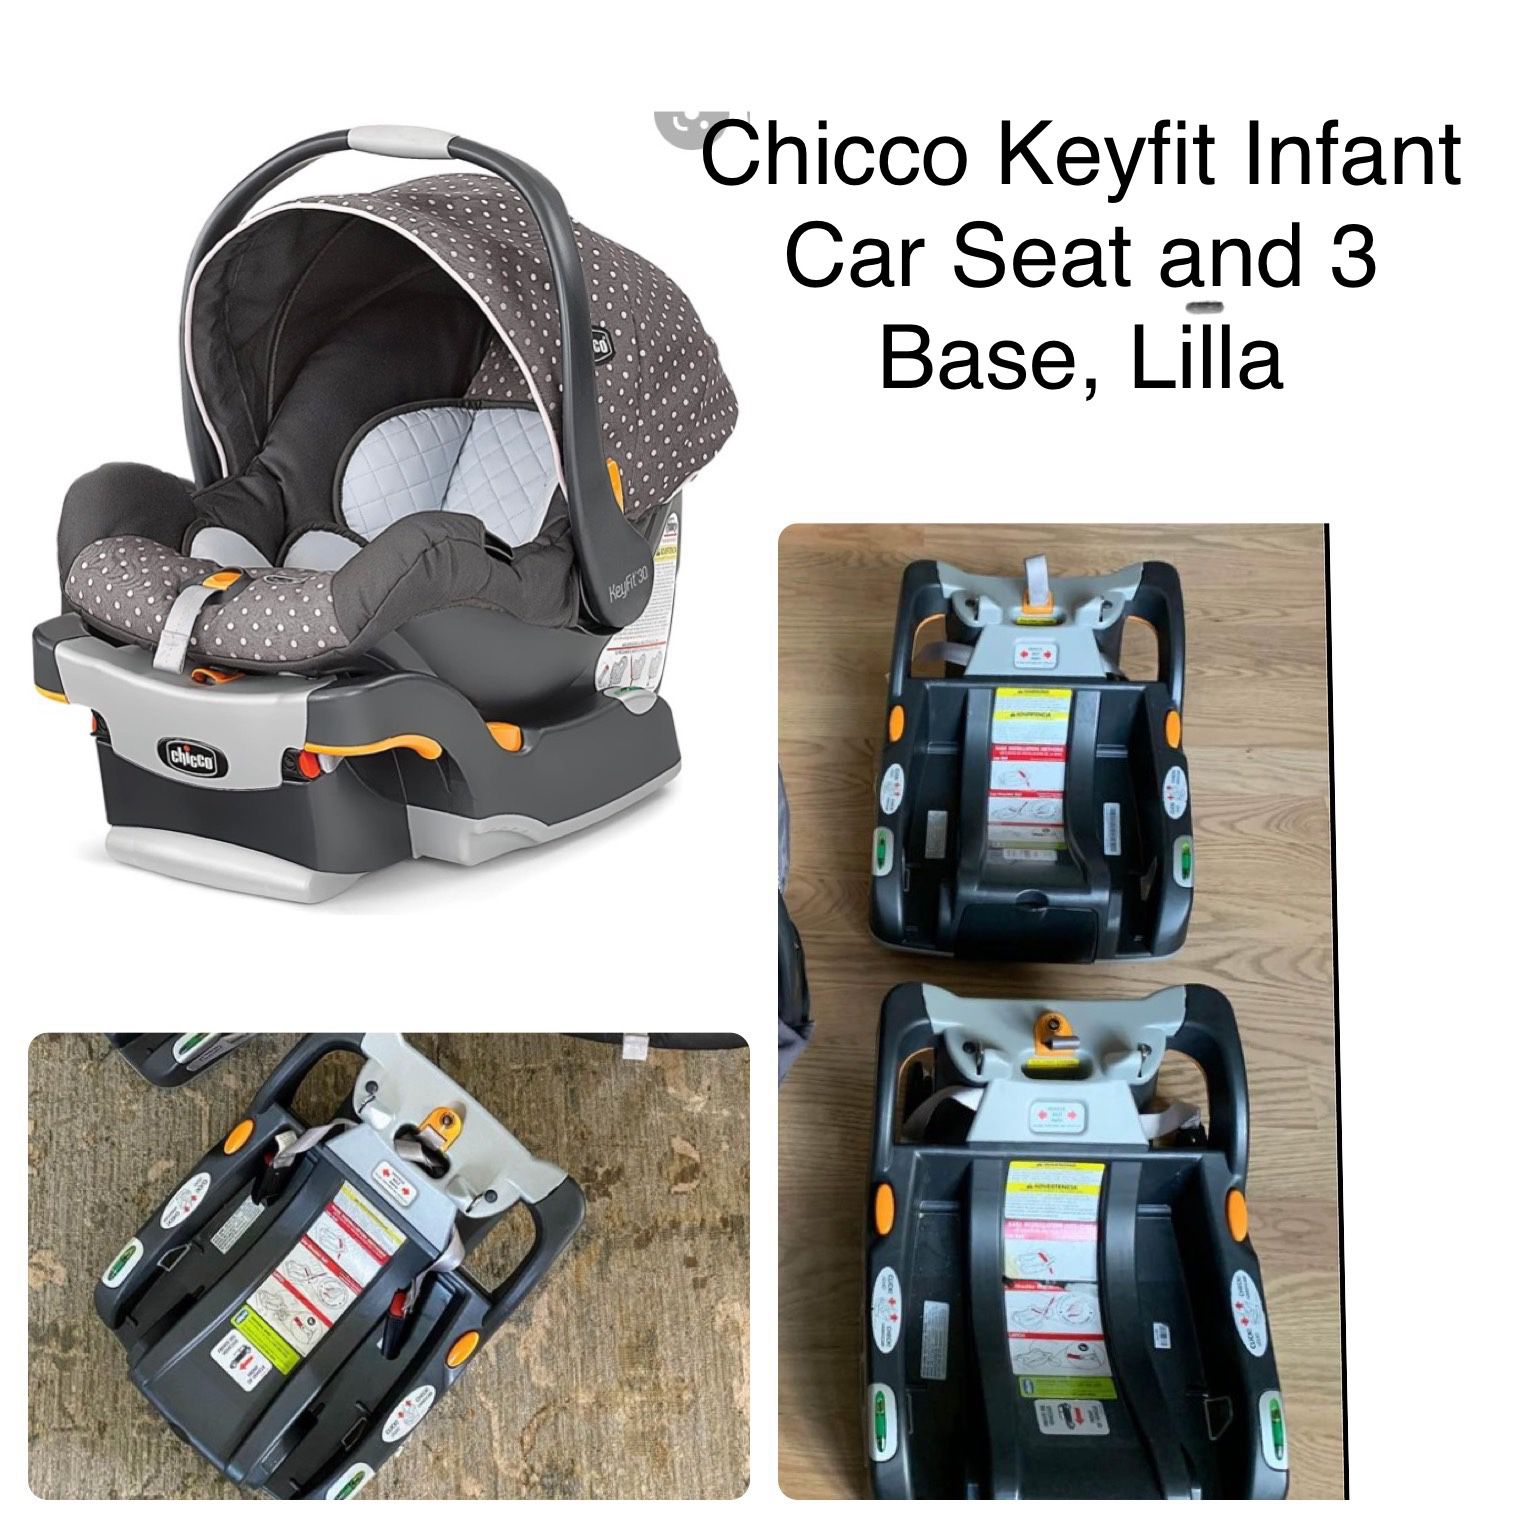 Chicco Keyfit Infant Car Seat and 3 Bases, Lilla